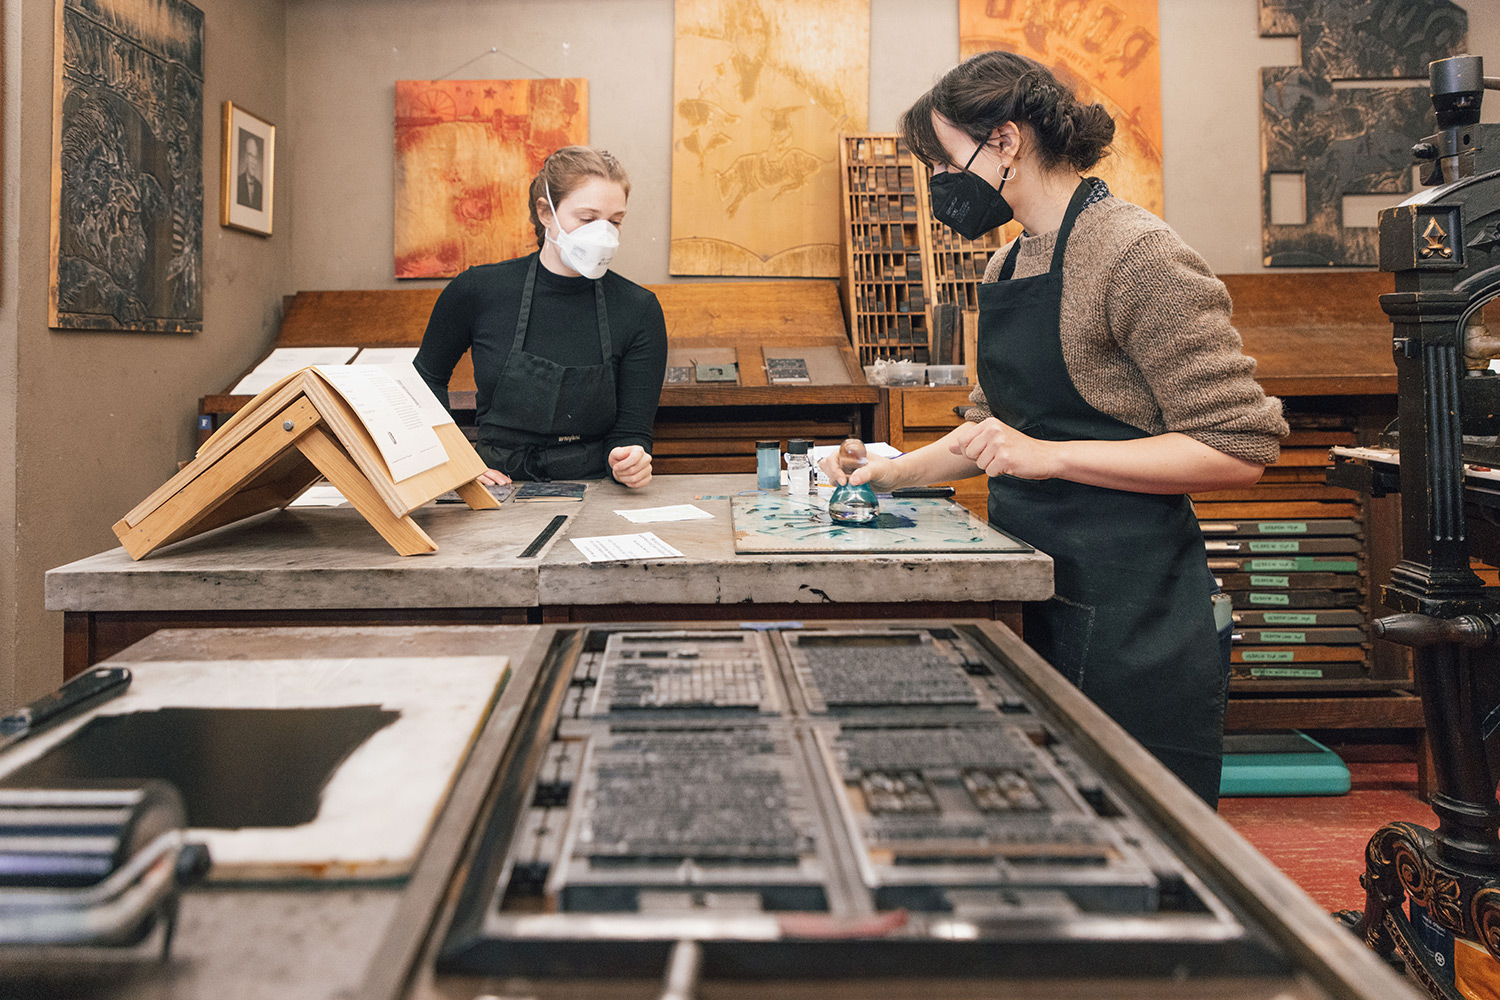 Two women stand at a desk. One is using a glass muller to blend green ink on the desktop as the other watches. In the foreground is a tray with type for letterpress printing